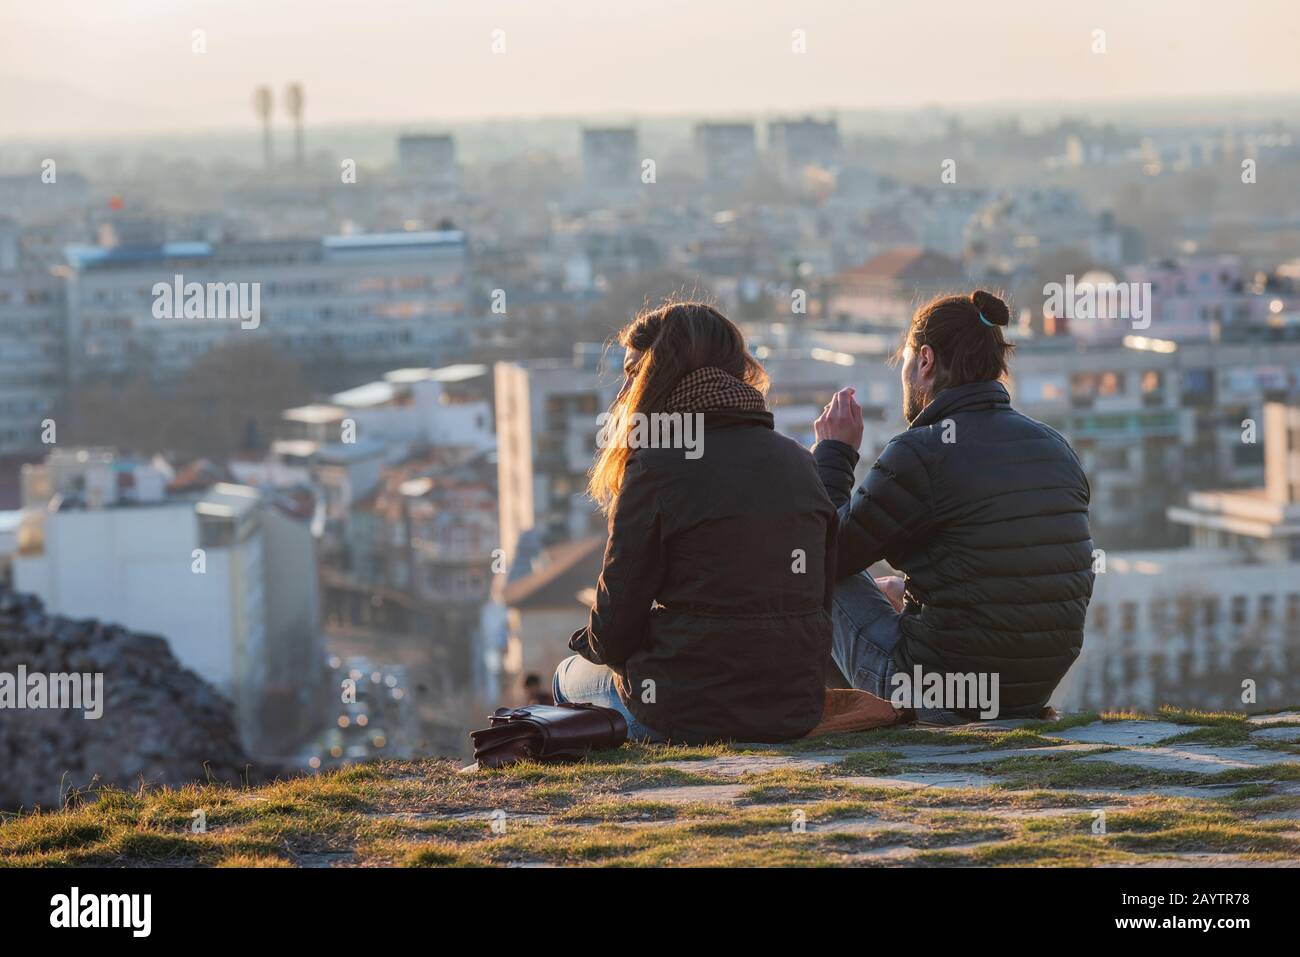 Plovdiv city / Bulgaria - February 16 2020: People waching sunset from Nebet tepe Hill in Plovdiv city, Bulgaria - the oldest European city Stock Photo